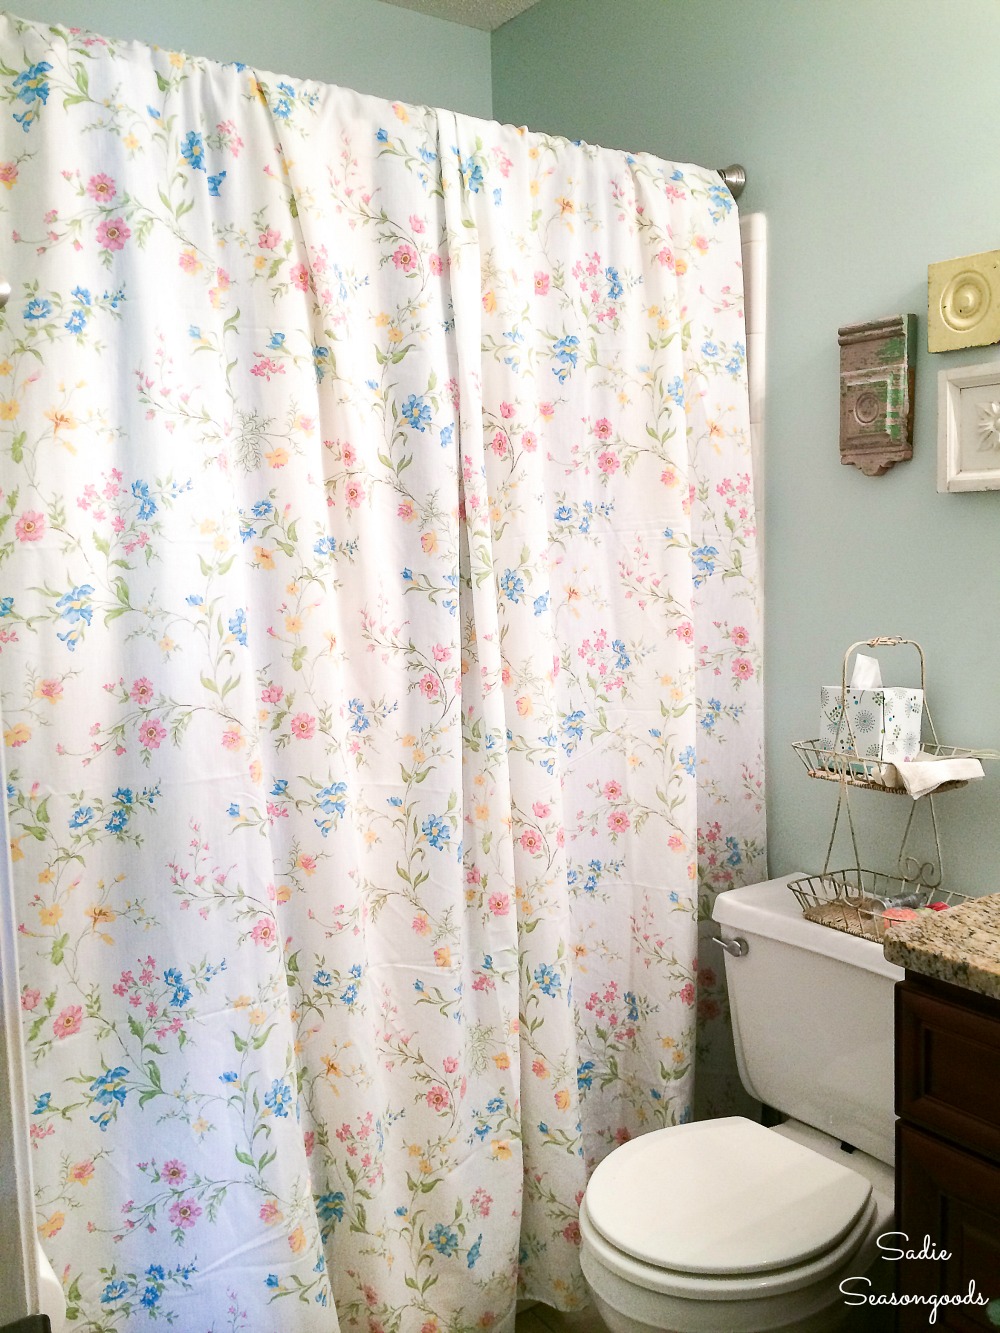 Vintage bed sheets for upcycling as a floral shower curtain